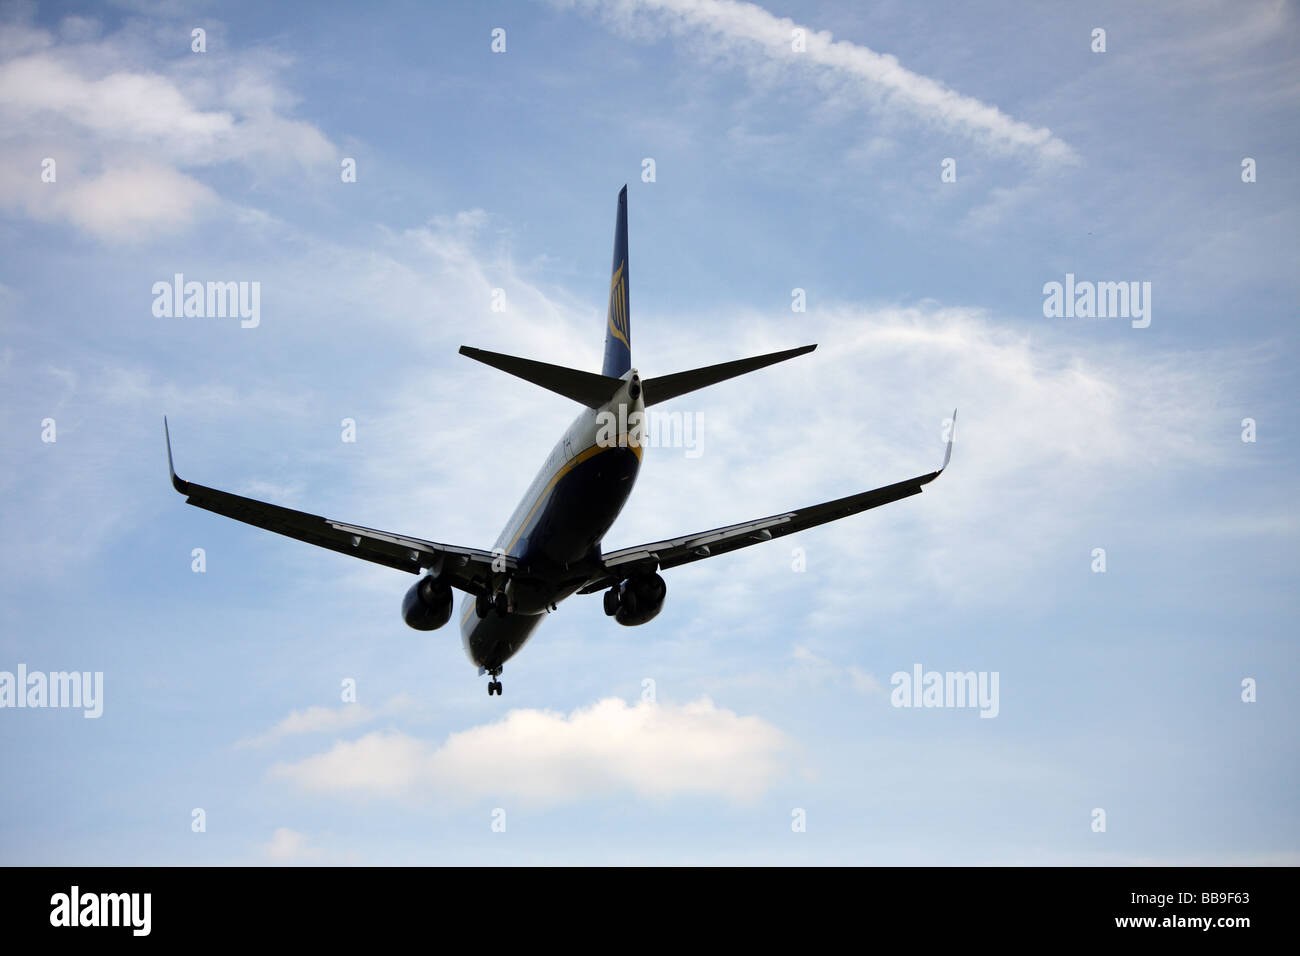 A passenger airplane getting ready to land Stock Photo